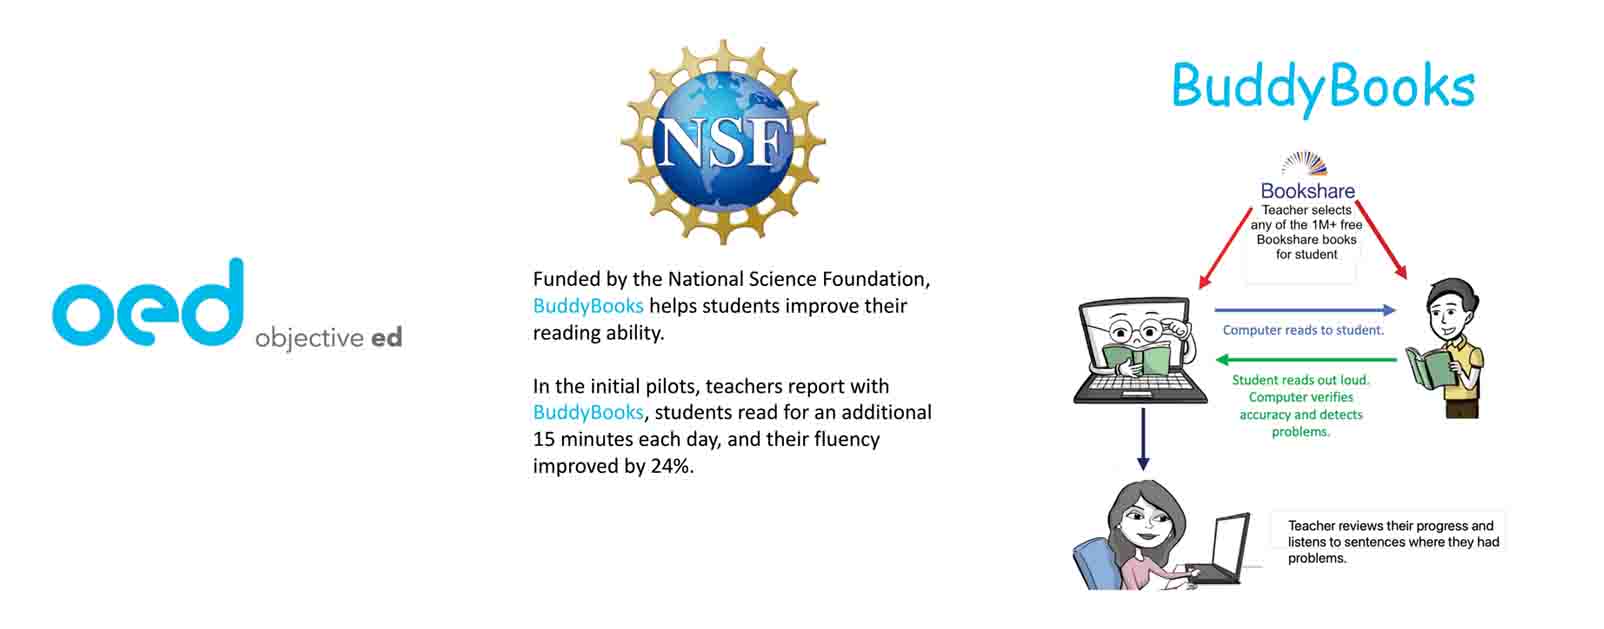 The ad shows the National Science Foundation logo along with the ObjectiveEd logo and a diagram of how BuddyBooks works. Under the National Science Foundation logo, ithe text reads: funded by the National Science Foundation, BuddyBooks helps students improve their reading ability.In the initial pilots, teachers report with BuddyBooks, students read for an additional 15 minutes each day, and their fluency improved by 24%. The diagram entitled BuddyBooks shows the Bookshare logo, with the text: Teacher selects any of the 1 million or more Bookshare books for the student.  The diagram shows a hand-drawn cartoon image of a laptop computer with eyes wearing glasses, holding a book, and to its right, student holding a book, with green arrow from the student to the computer, and a blue arrow from the computer to the student.  Under the blue arrow, it reads: Computer reads to the student, and under the green arrow: Student reads out loud while the computer verifies accuracy and detects problems.  Under the computer, is a teacher at a laptop, and another blue arrow from the computer to the teacher.  That arrow reads: Teacher reviews their student’s progress and listens to ;sentences where the student had problems.


